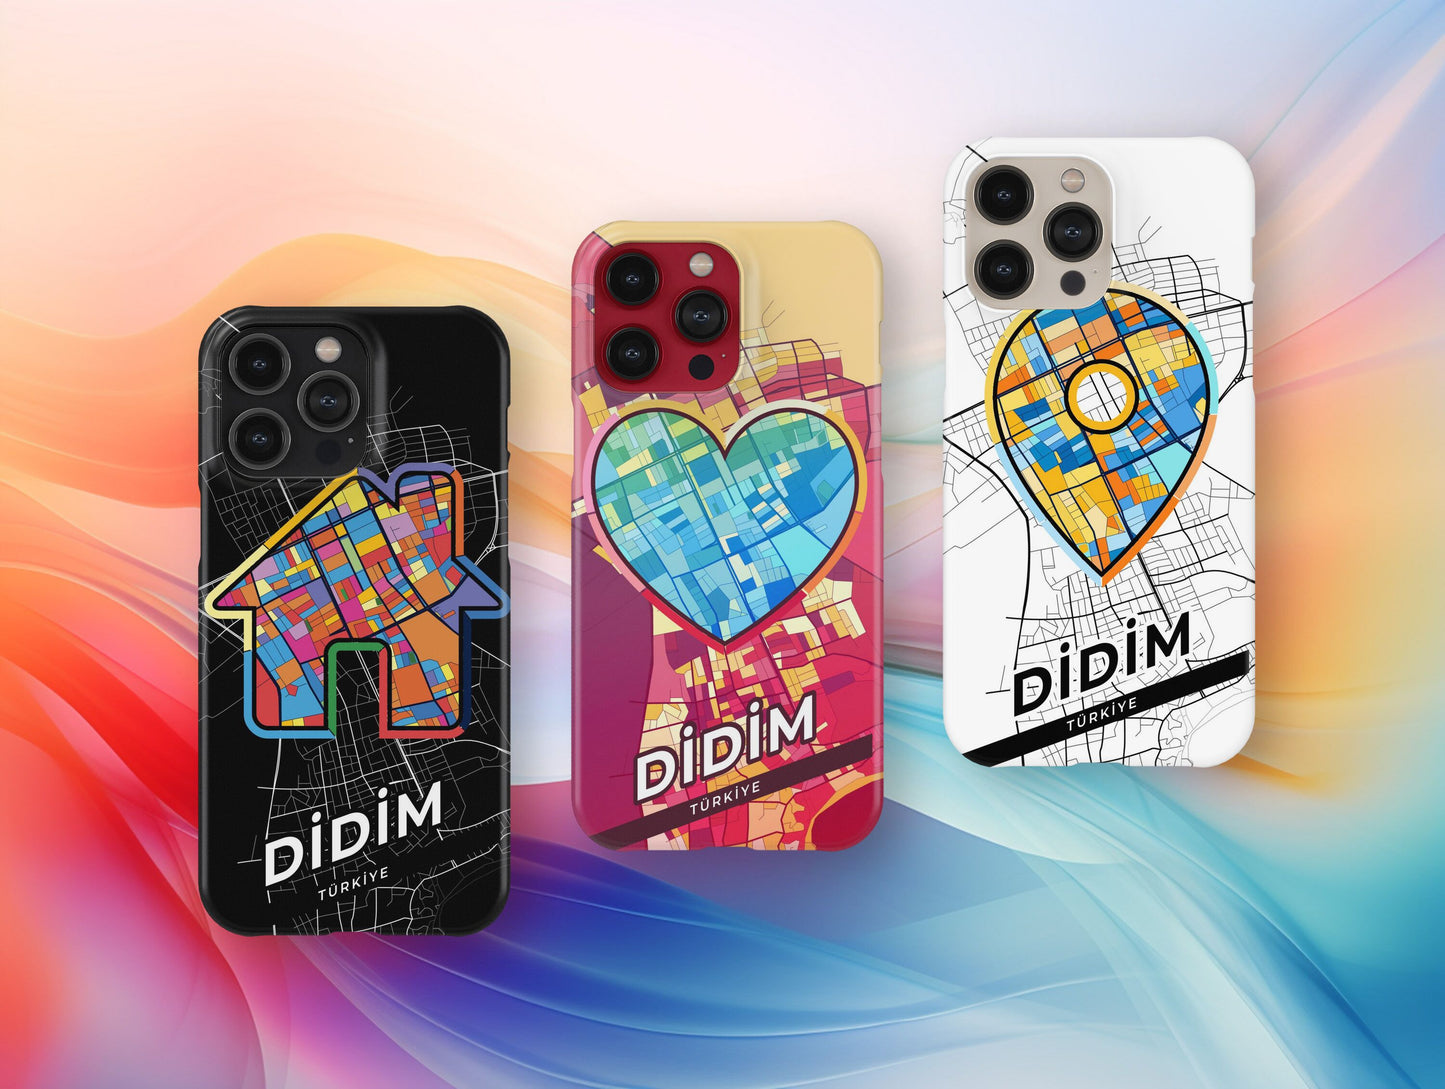 Didim Turkey slim phone case with colorful icon. Birthday, wedding or housewarming gift. Couple match cases.